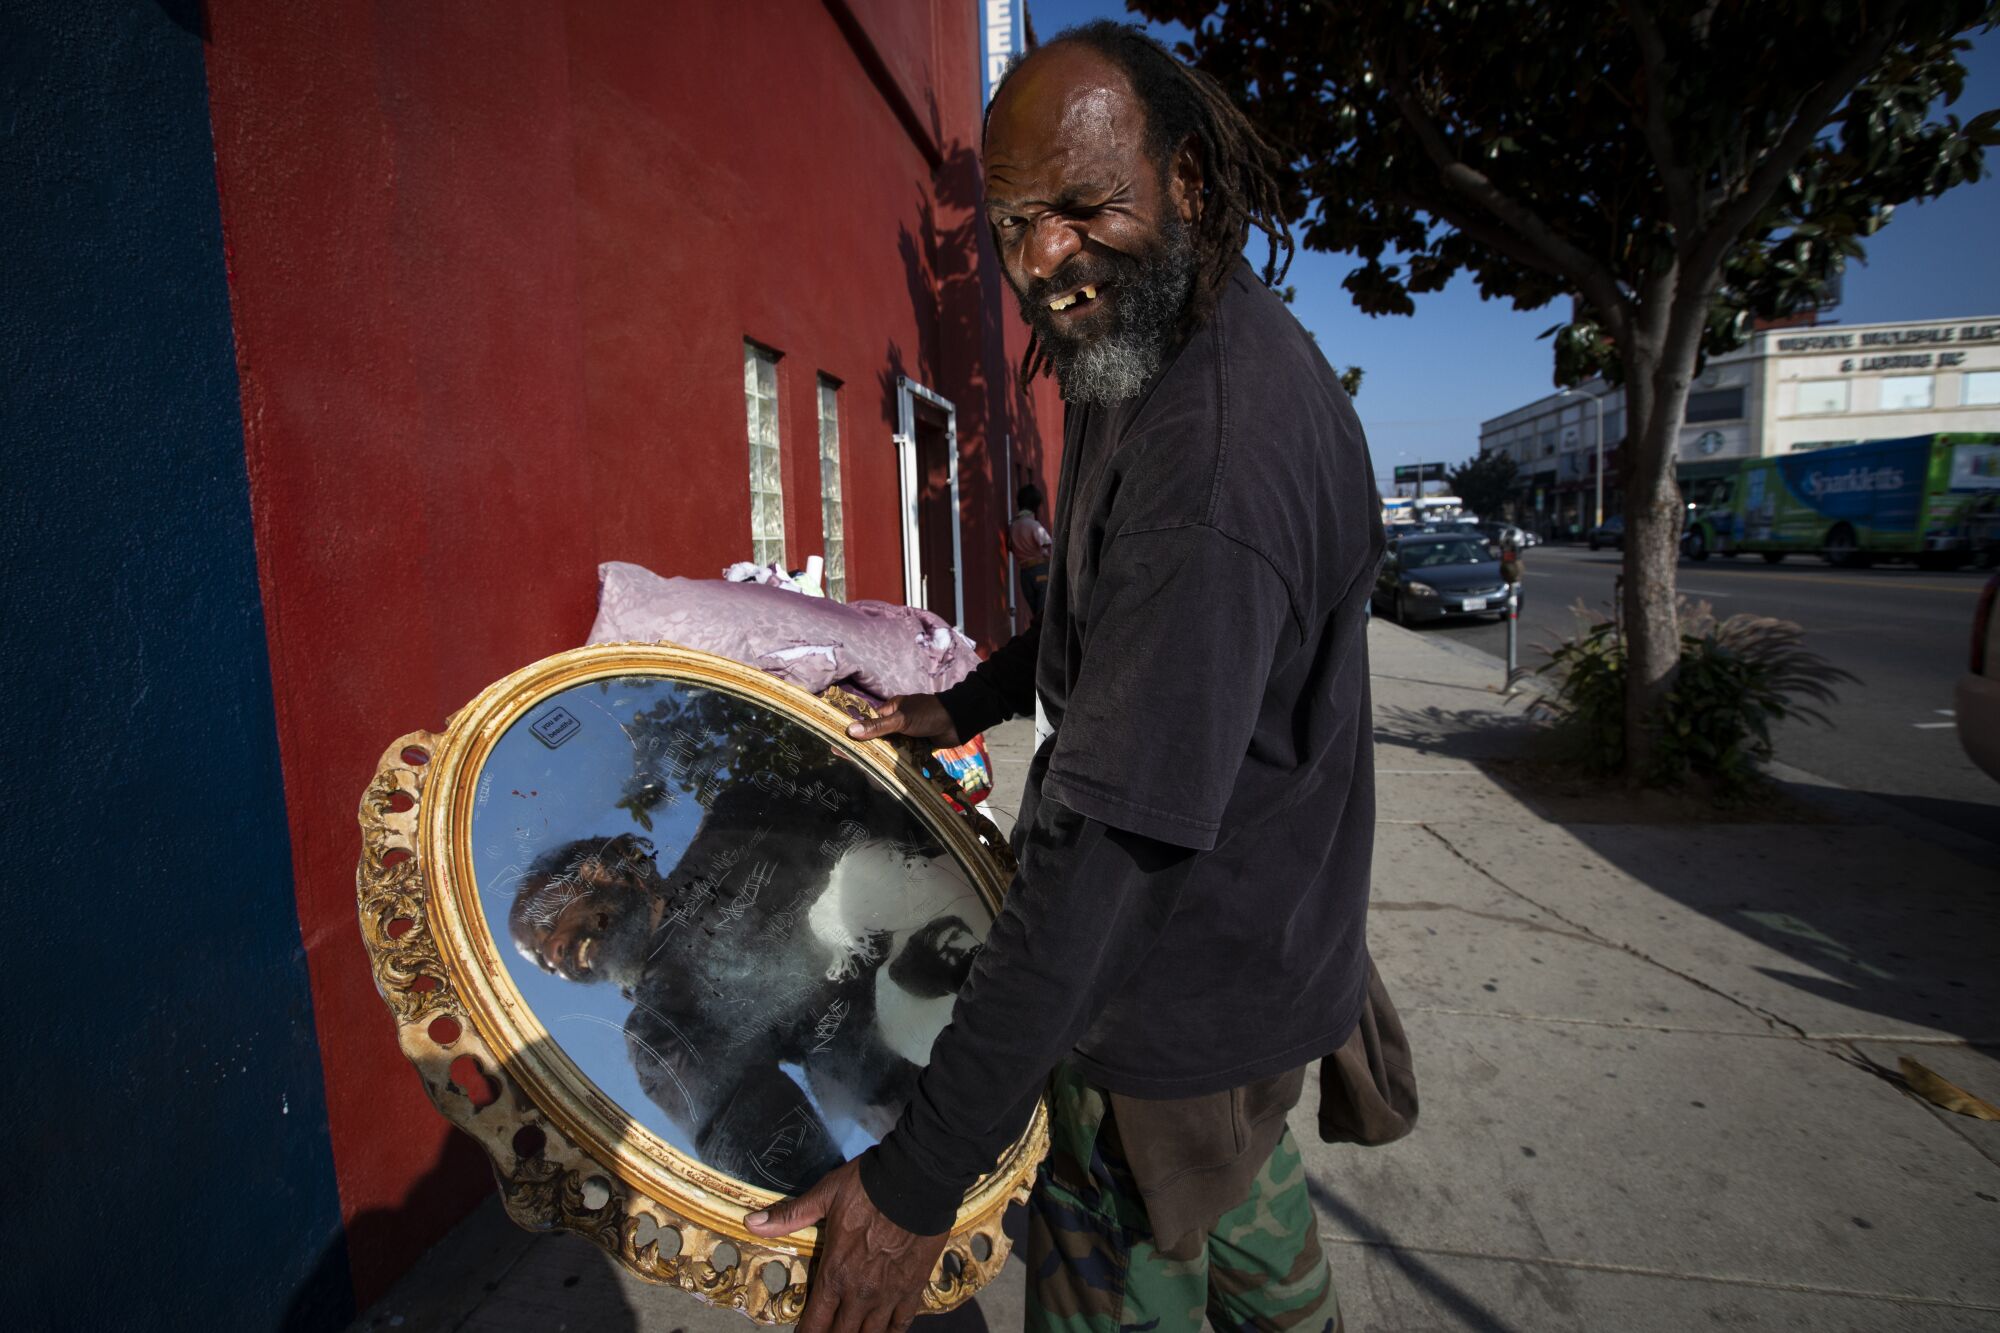 A man stands on a sidewalk holding an ornate mirror in both hands. 